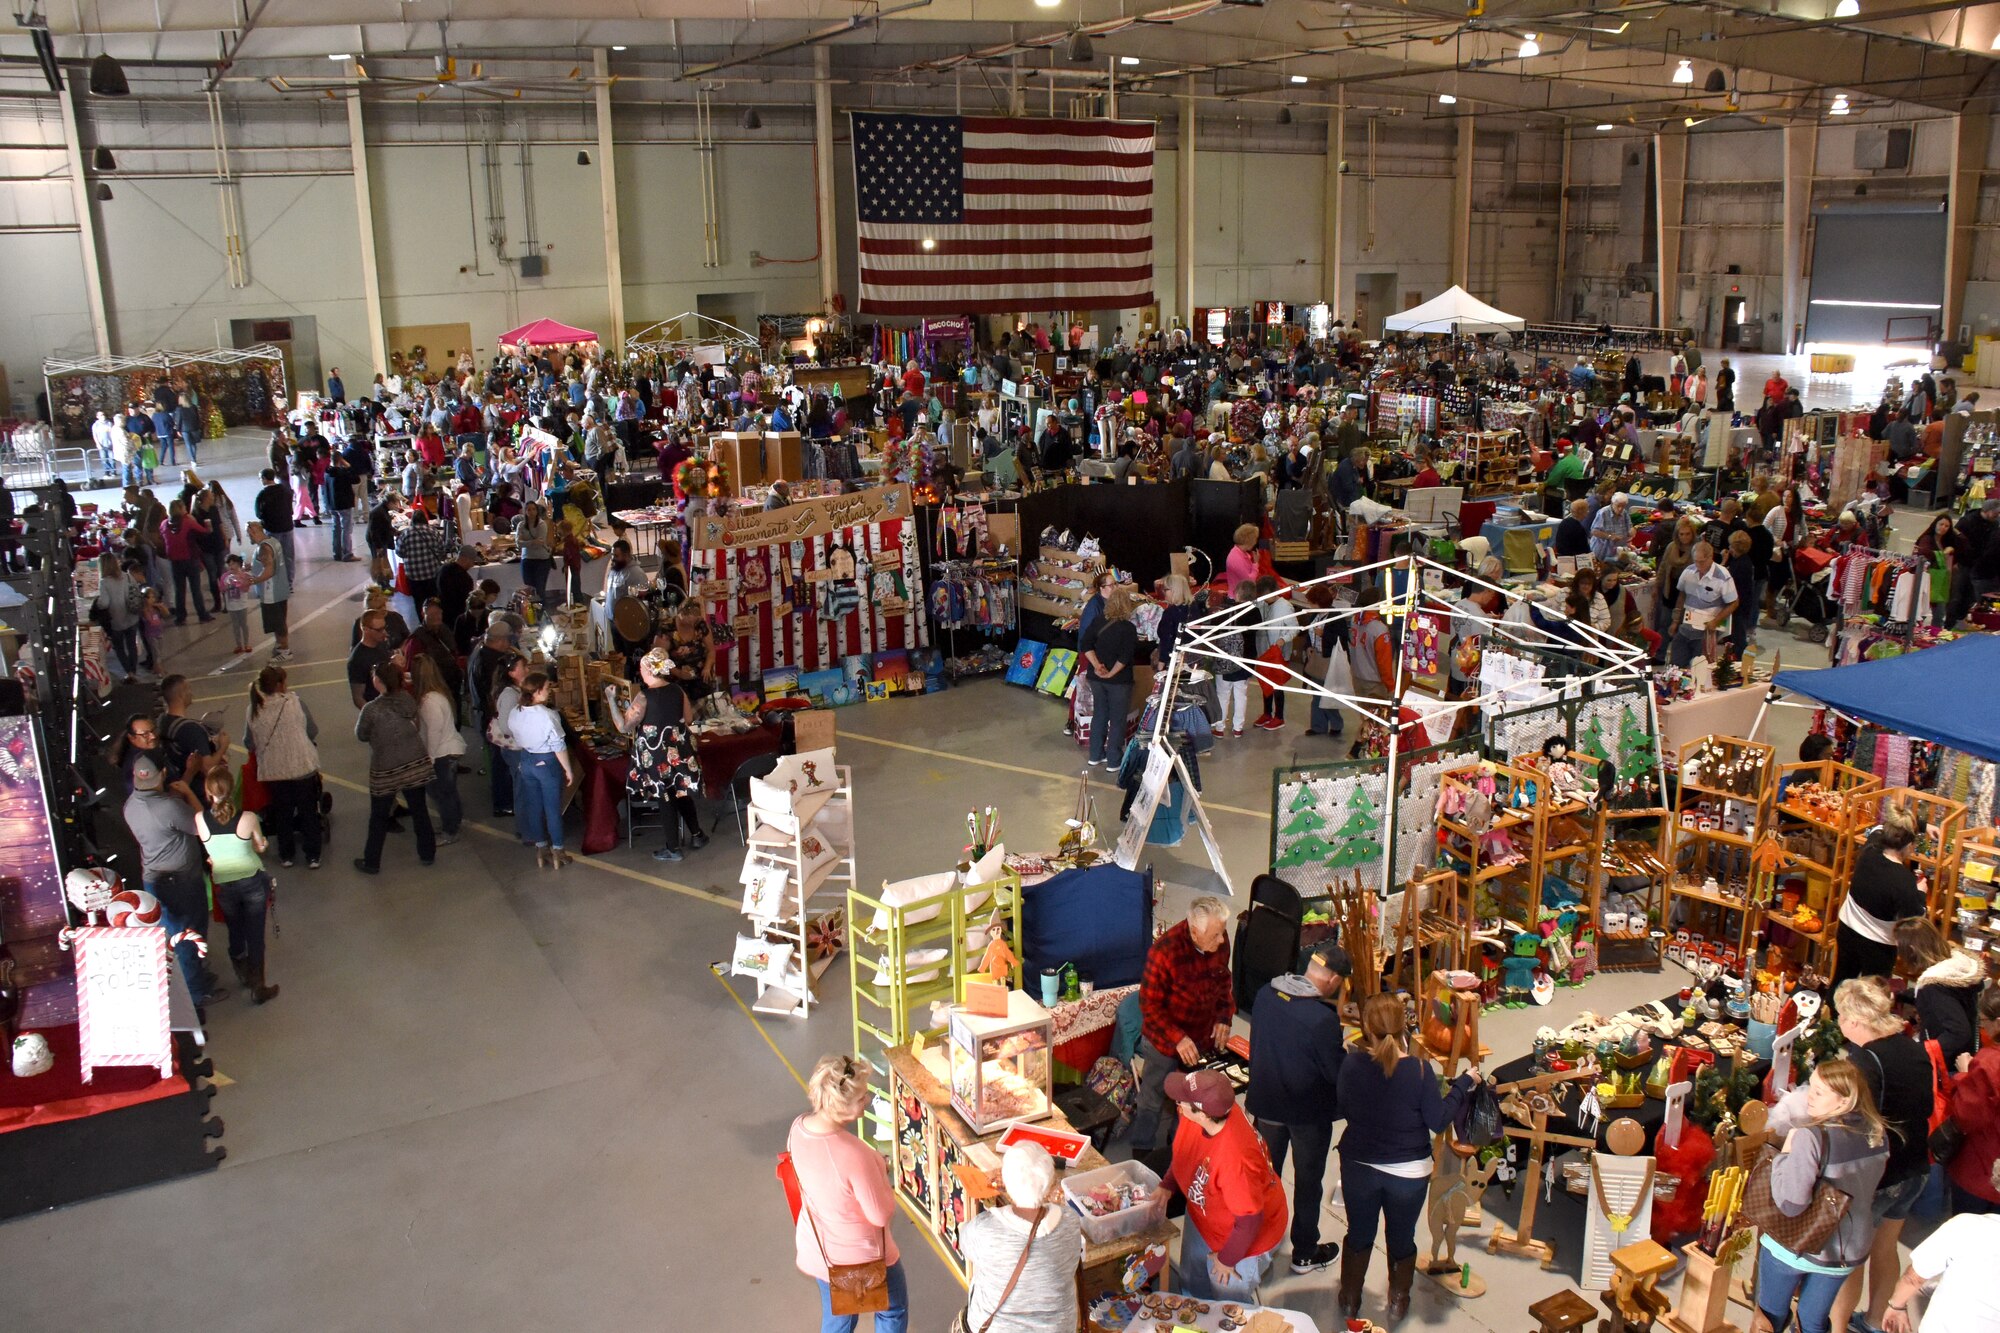 Shoppers at the 38th annual Santa’s Market explore the booths at the Louis F. Garland Department of Defense Fire Academy on Goodfellow Air Force Base, Texas, Nov. 17, 2018. This year’s market is expected to be even bigger, hosting 86 vendors from across Texas filling 126 booths. (U.S. Air Force photo by Airman 1st Class Seraiah Hines/Released)